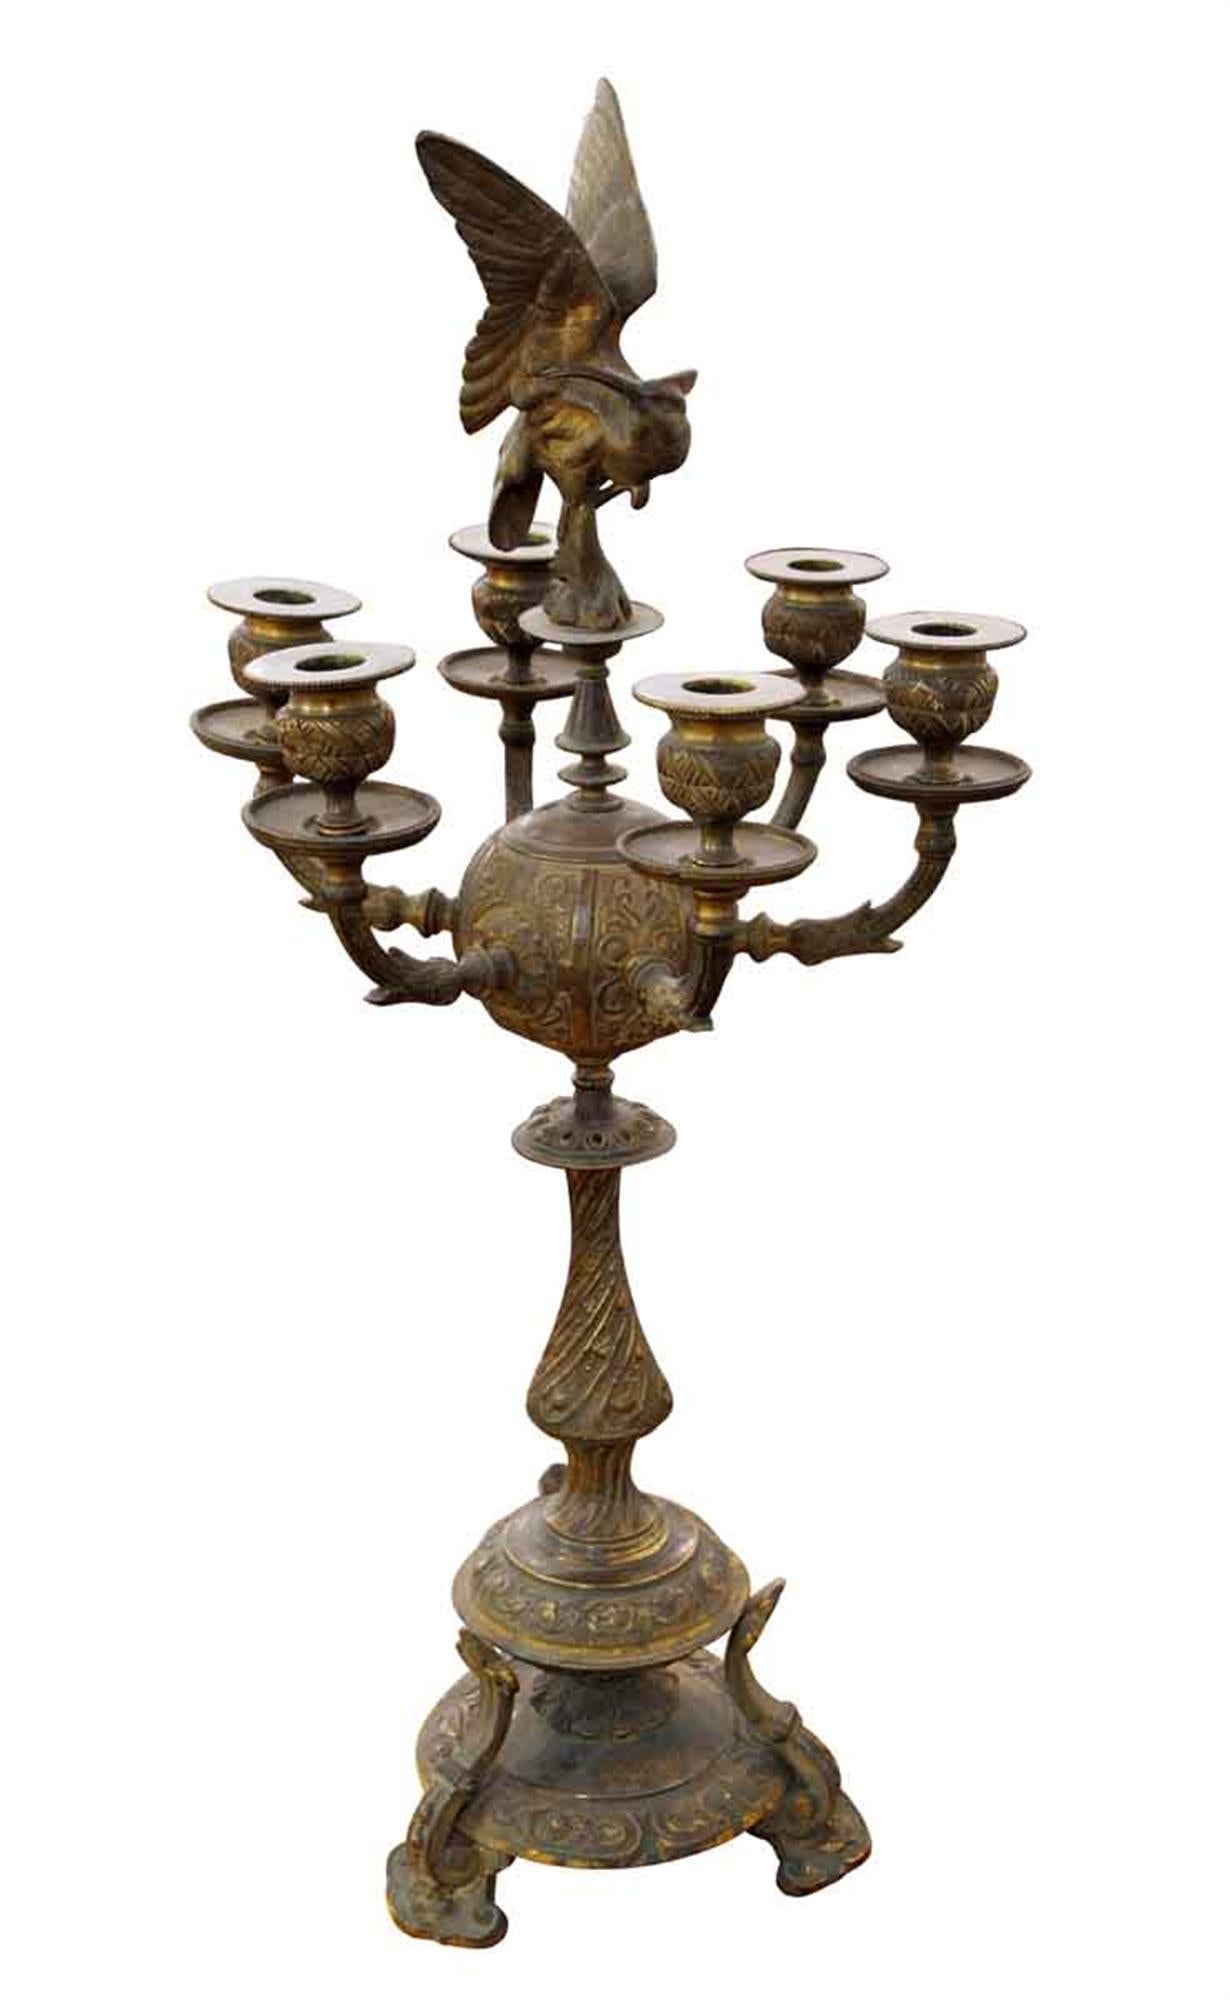 1880s highly ornate and figural solid bronze candelabras with six arms and heron bird detail on the top of each. Priced as a pair. Please note, this item is located in one of our NYC locations.